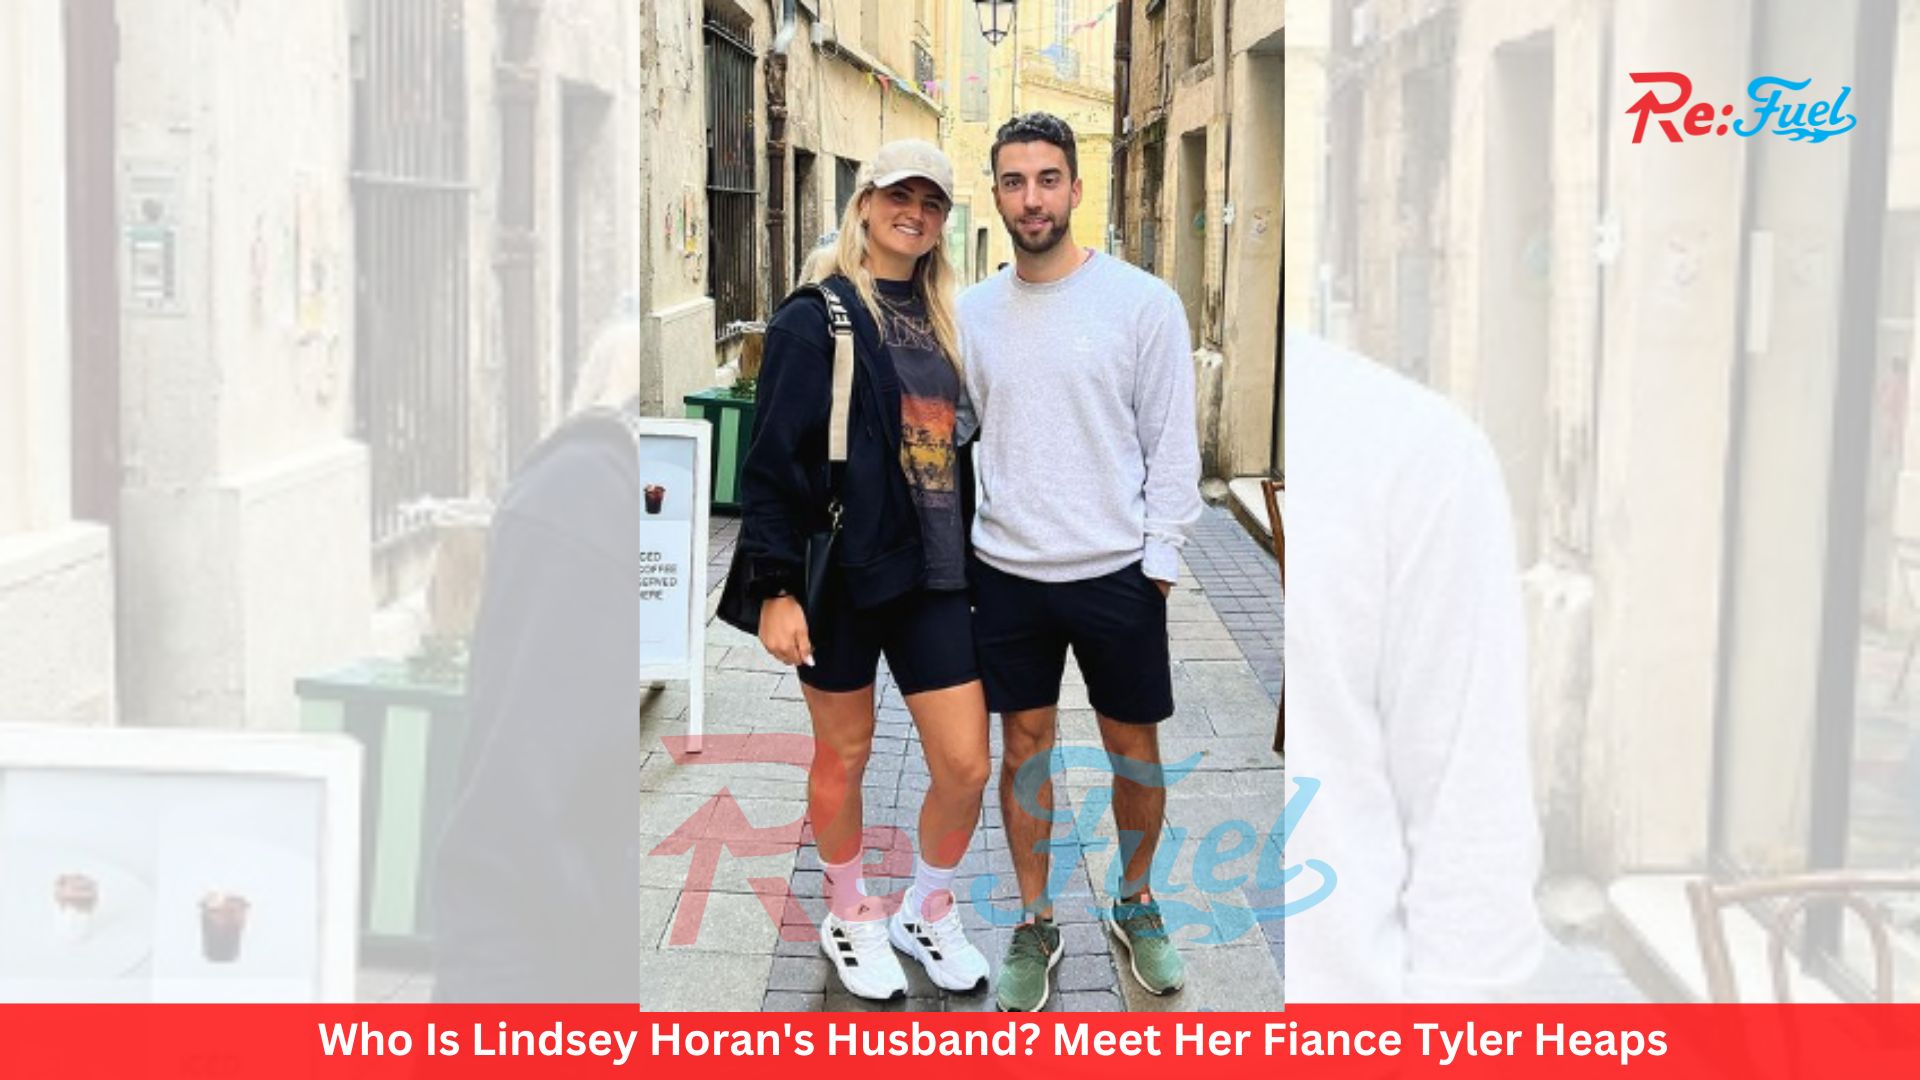 Who Is Lindsey Horan's Husband? Meet Her Fiance Tyler Heaps